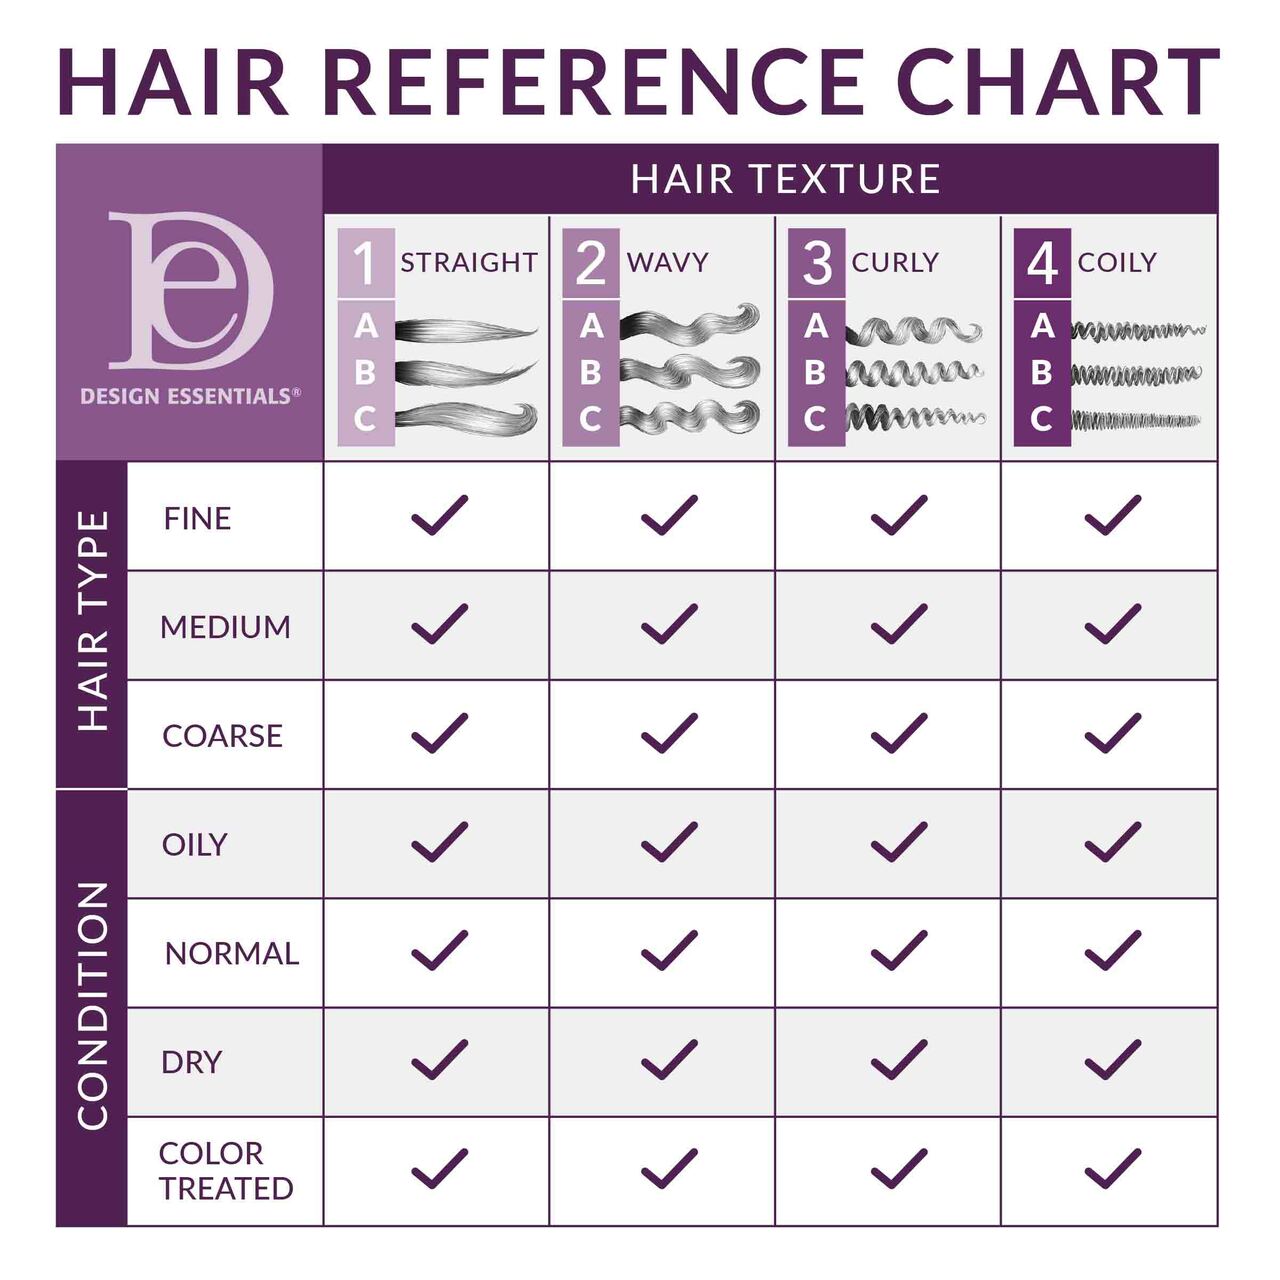 Moisturizing_Detangling_Leave-In_Conditioner_-_Hair_Reference_Chart__46791.1578654546